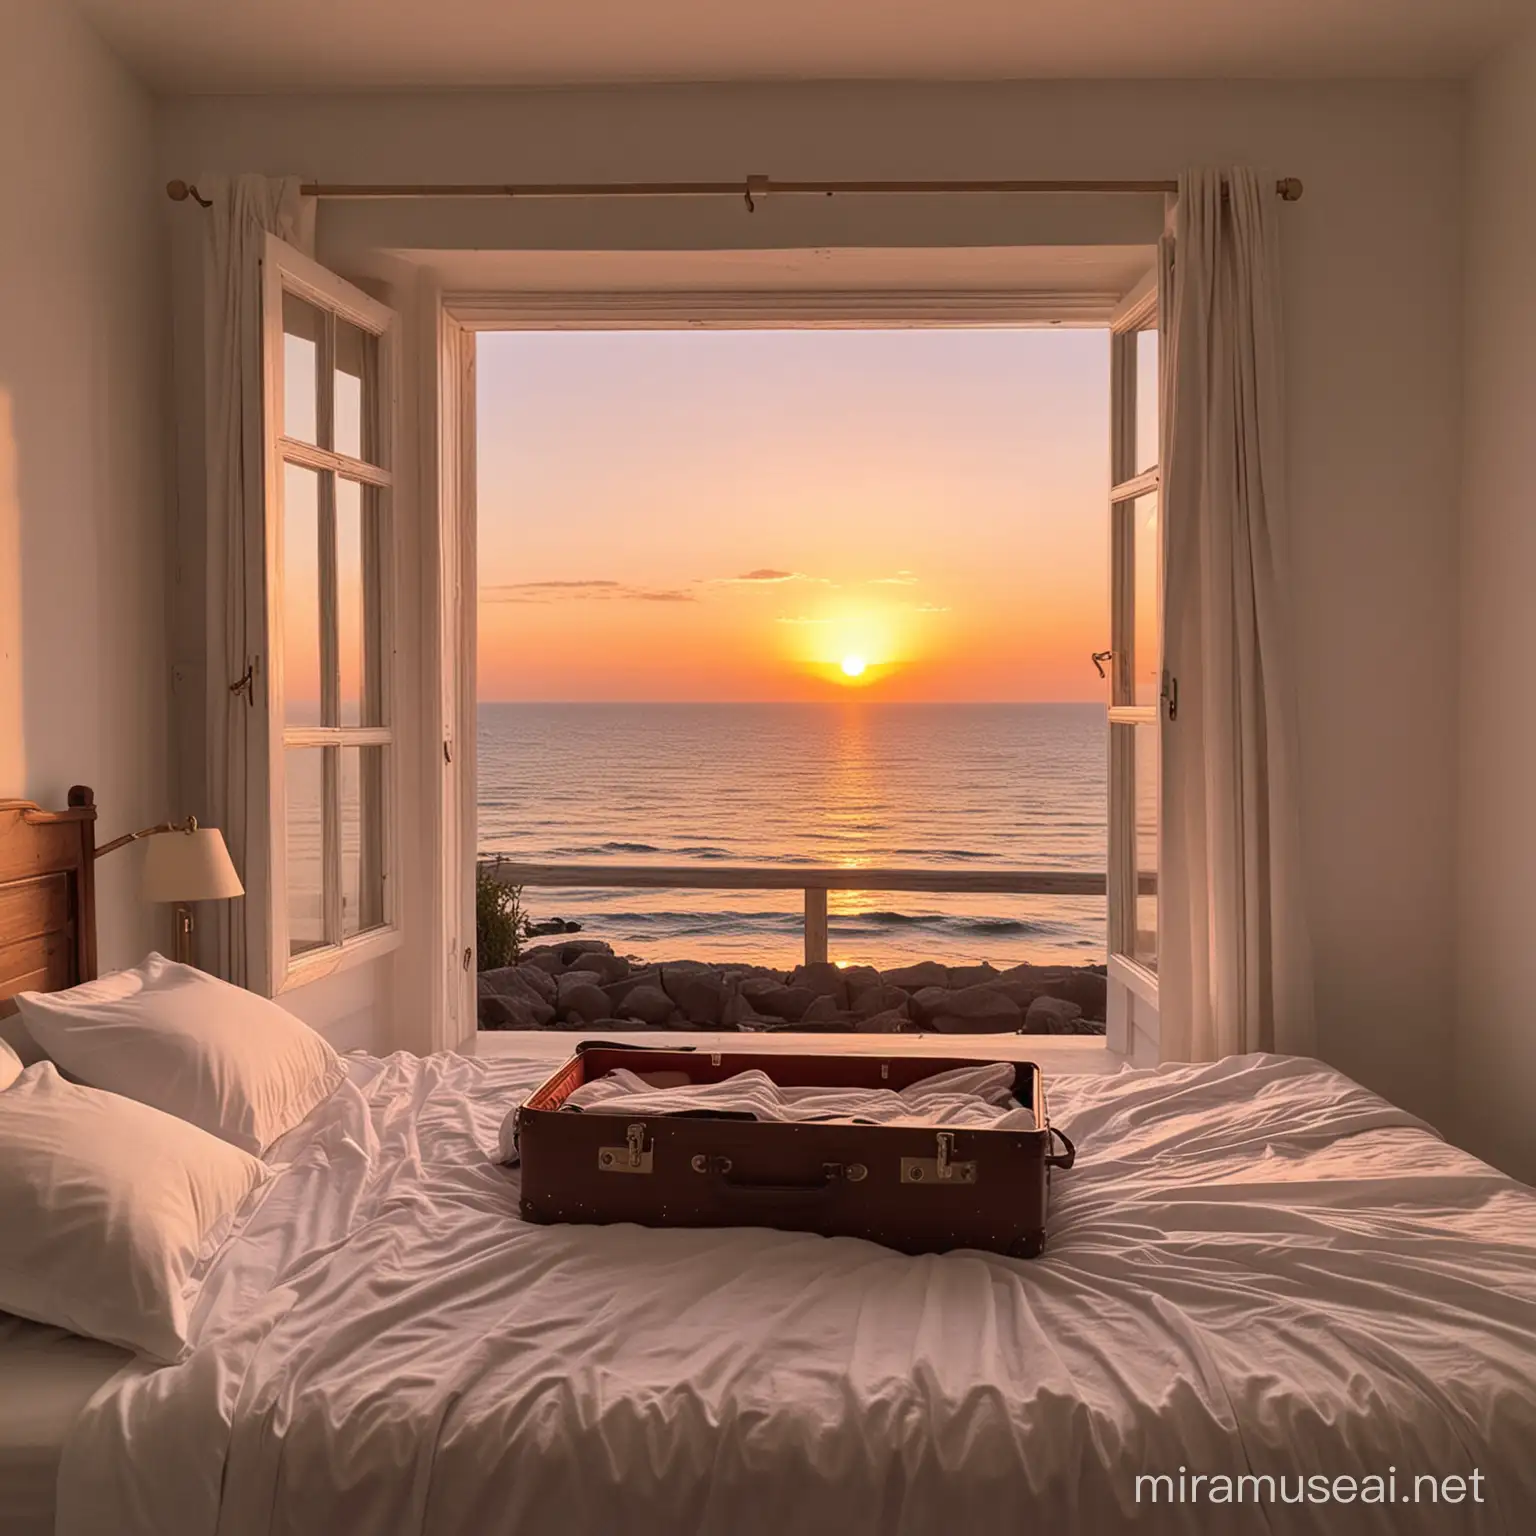 Young Man Unpacking Suitcase by Sunset Sea View Window